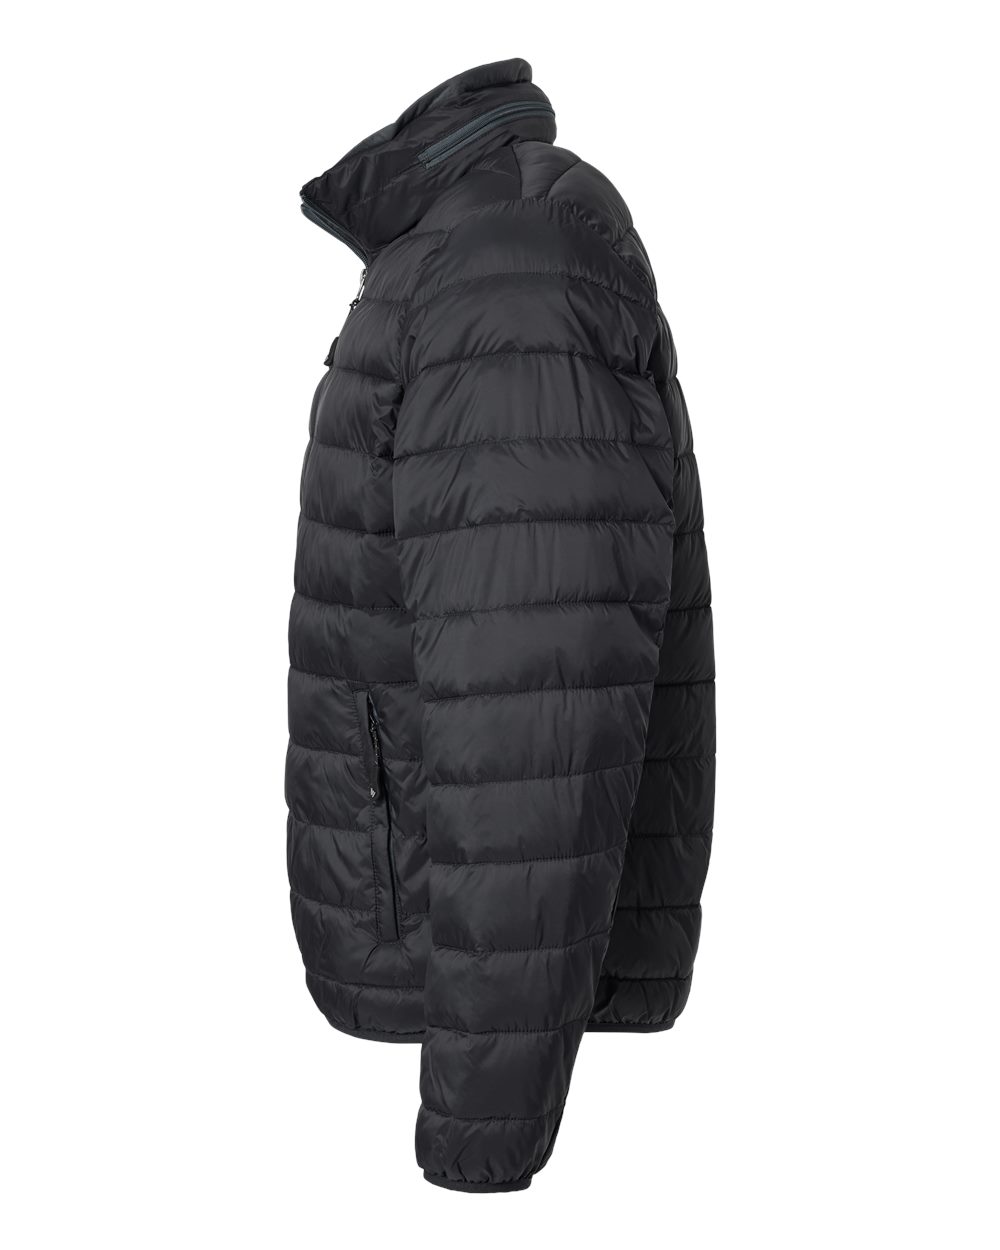 Long-Sleeved Pillow Puffer Jacket - Ready to Wear